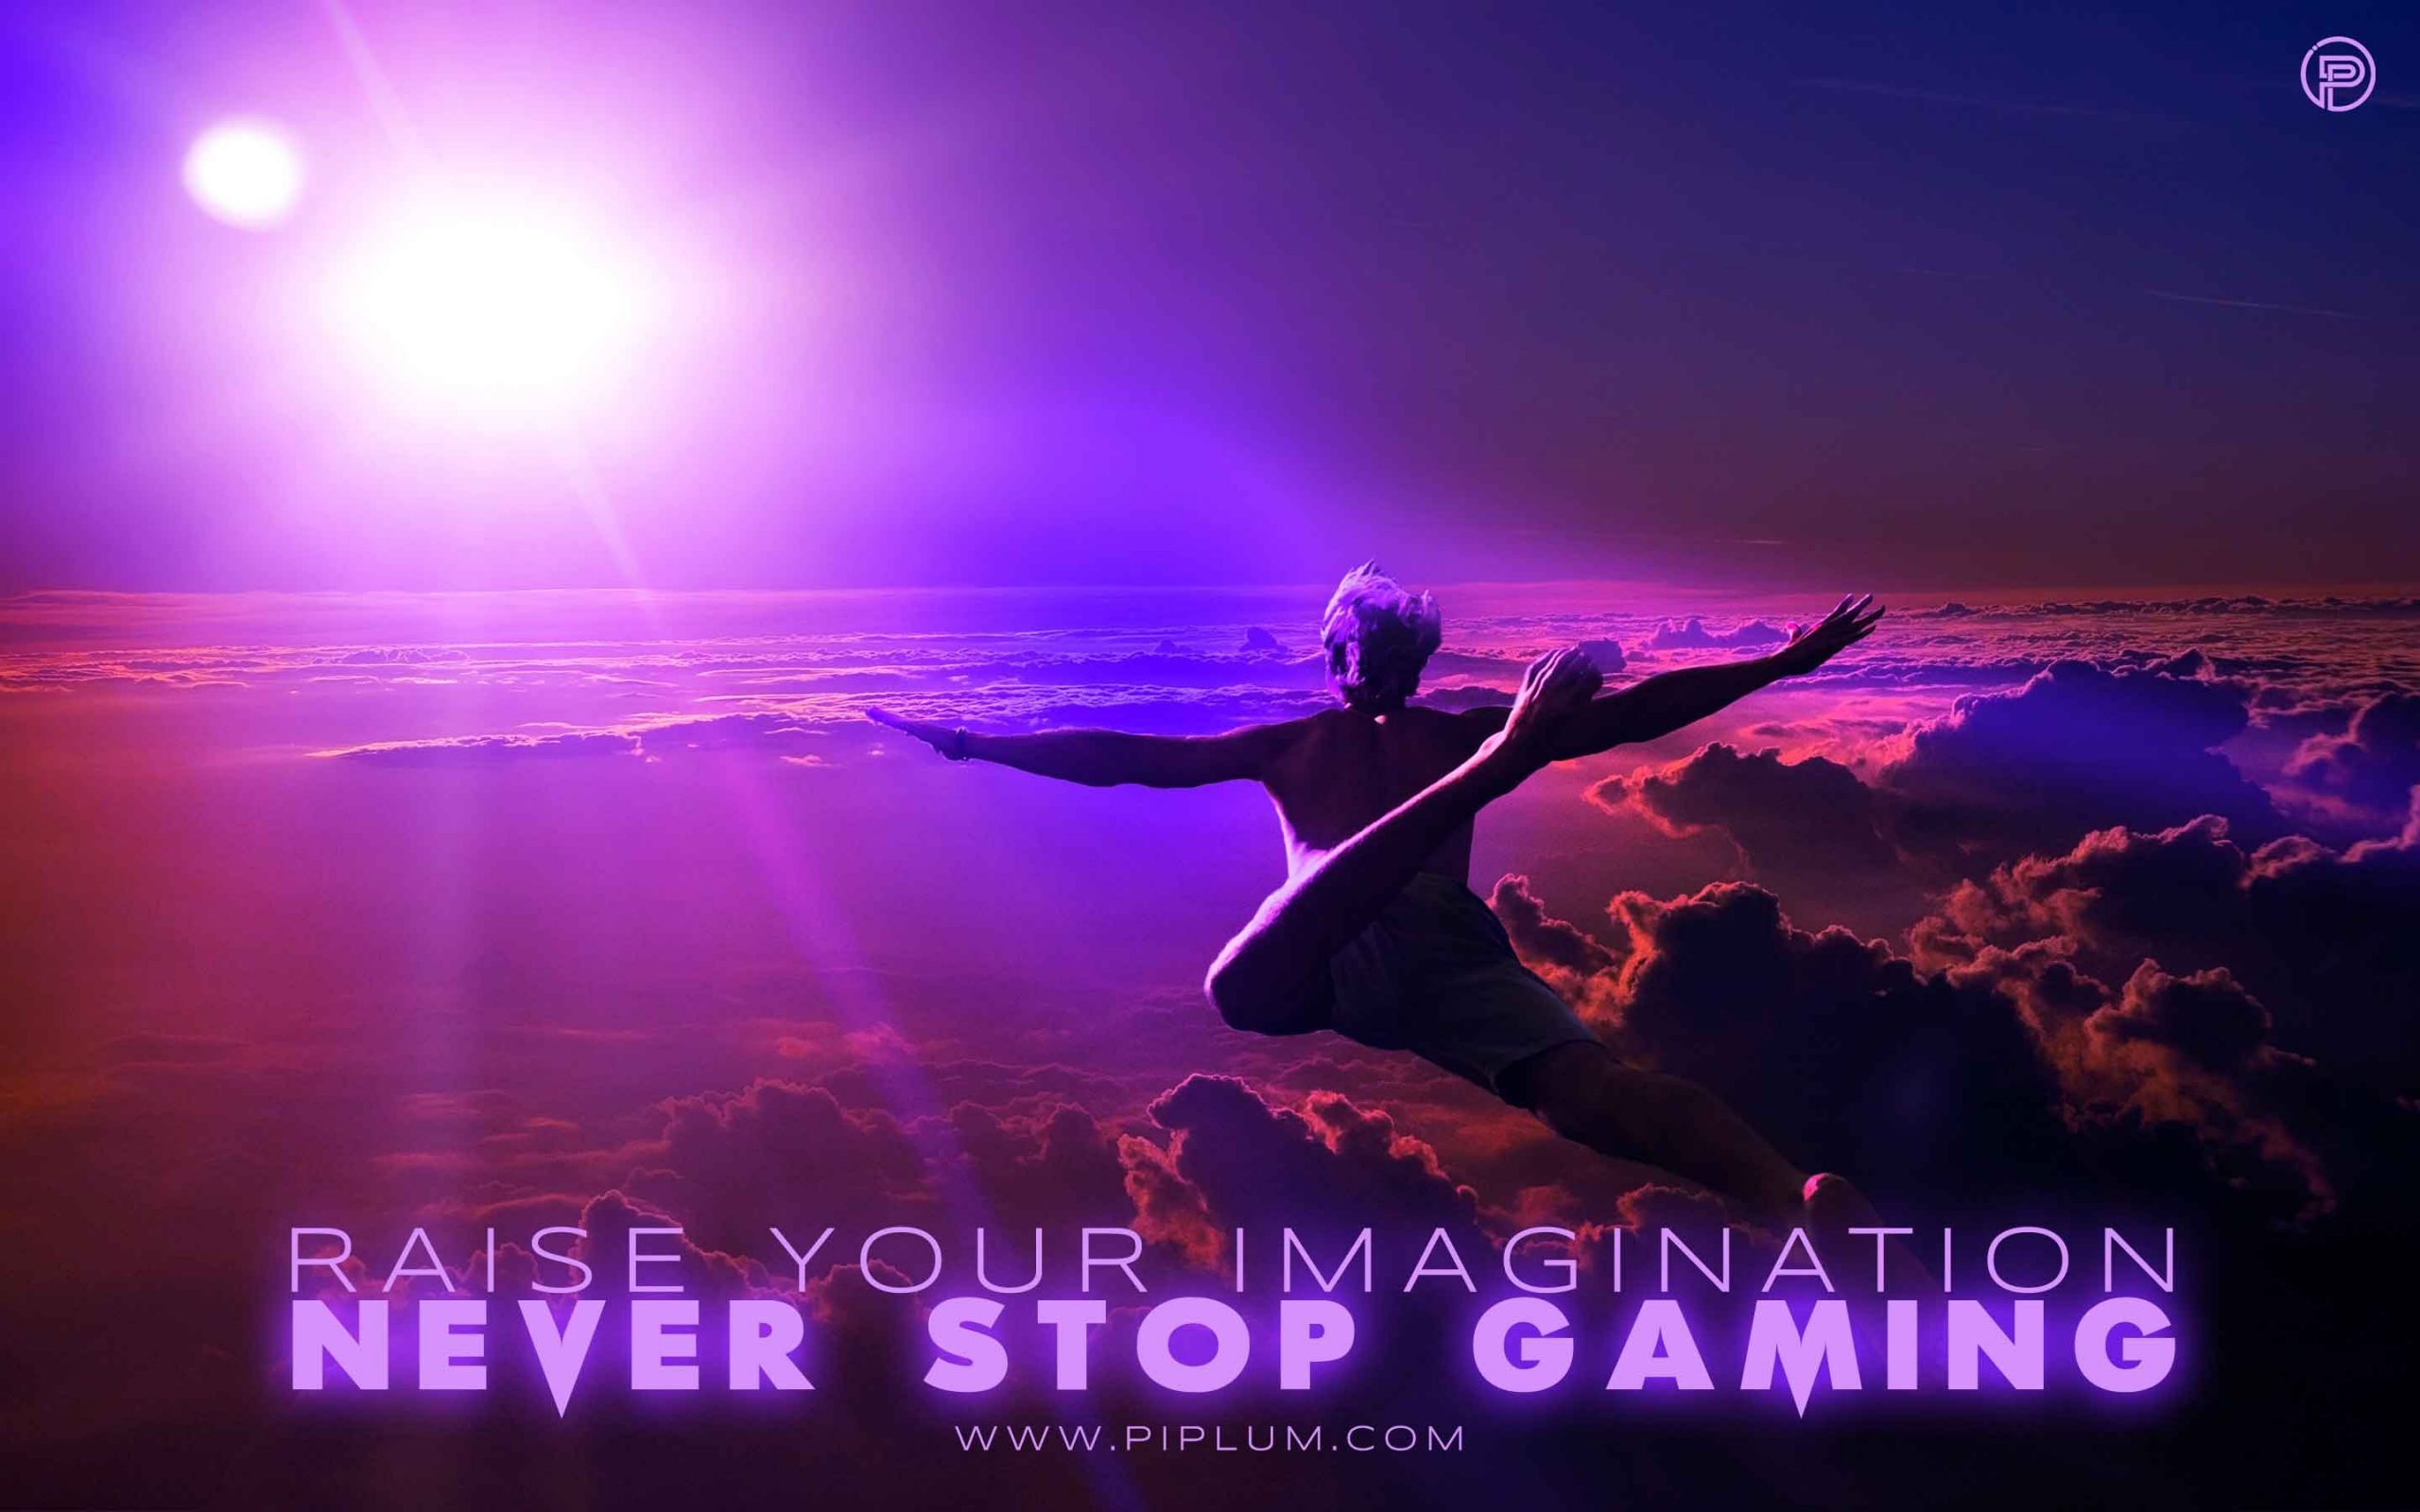 Raise-your-imagination-Never-stop-gaming-Virtual-reality-quote-man-flying-above-the-clouds